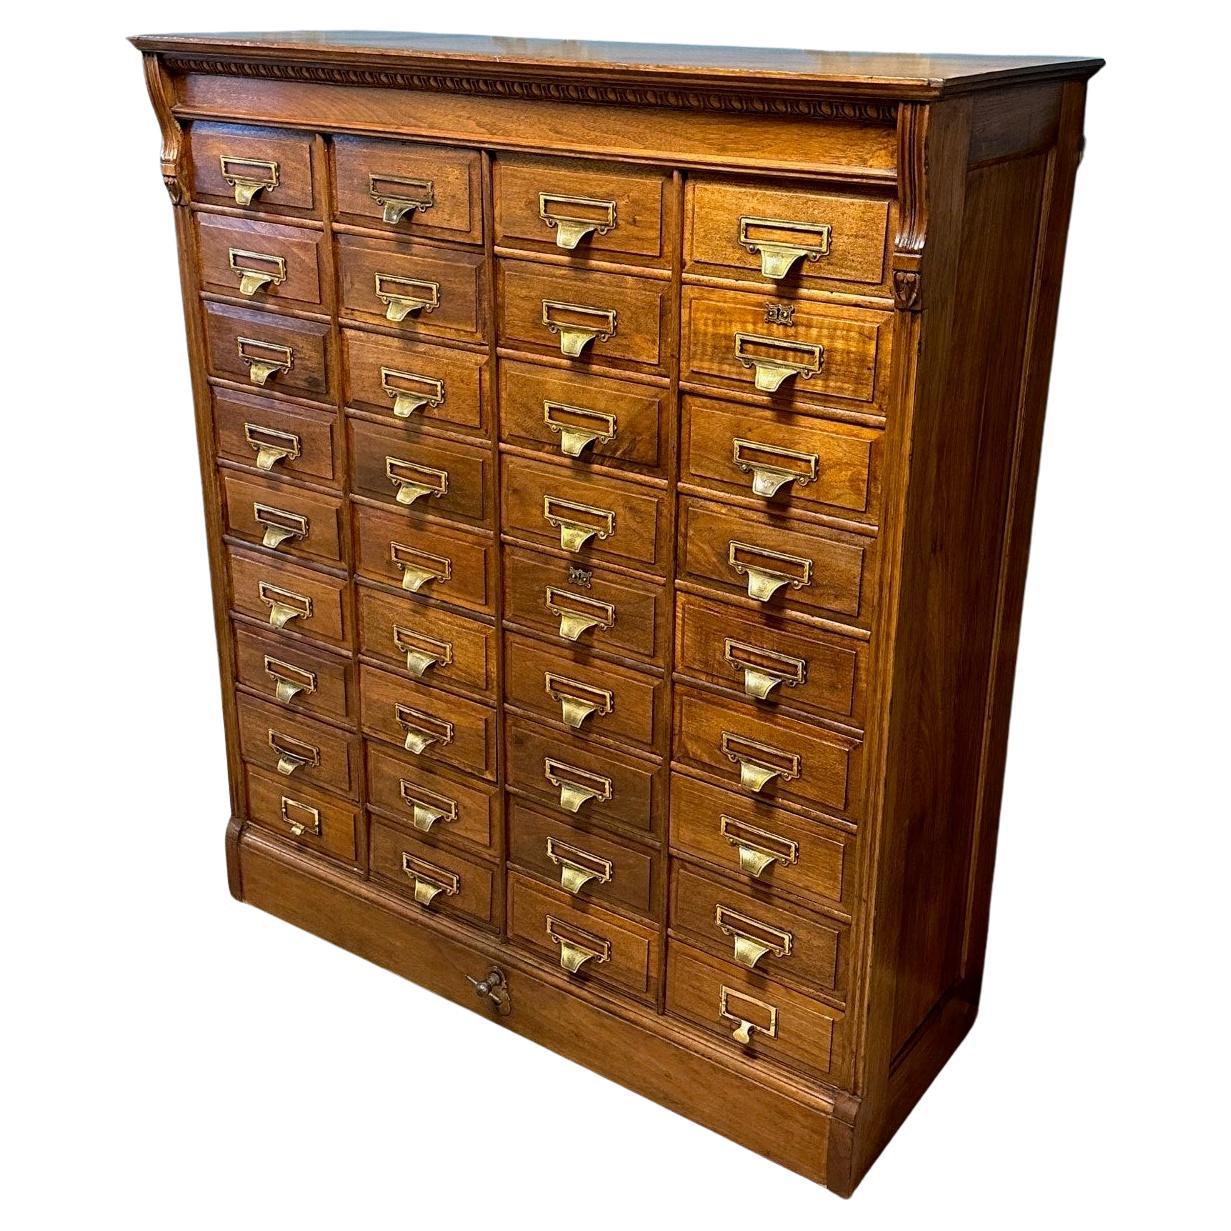 Antique file cabinet with 36 drawers